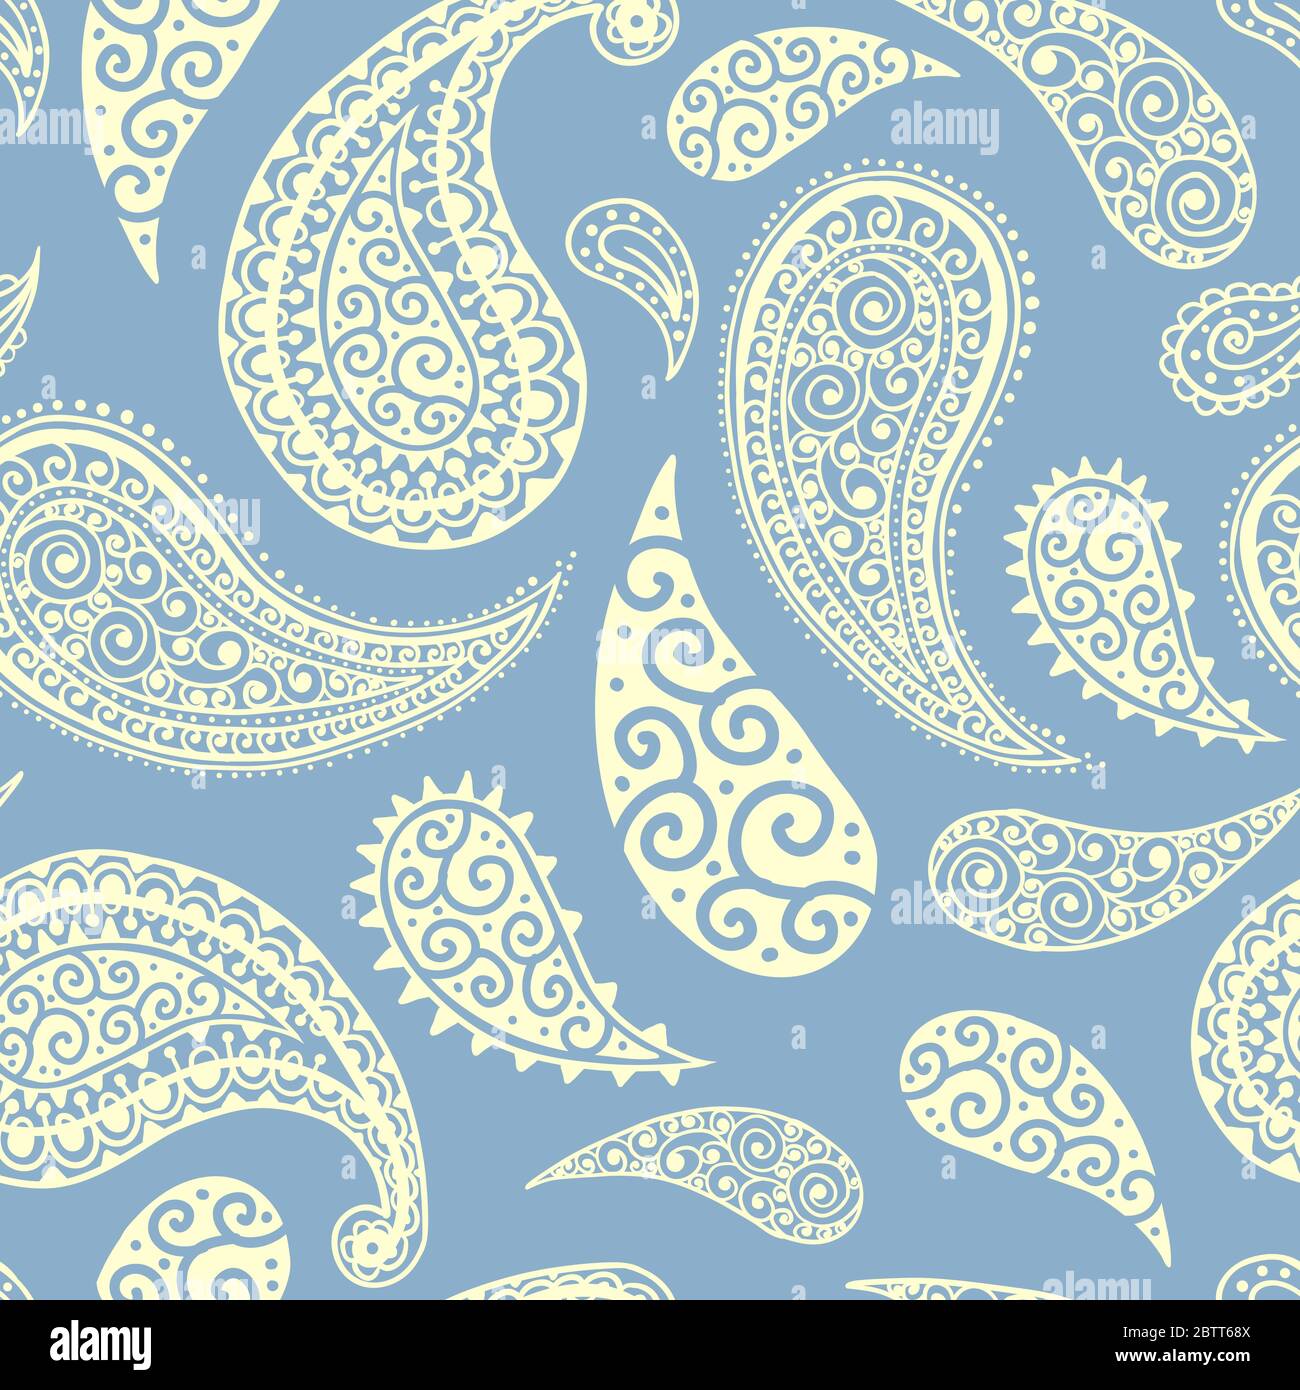 Paisley pattern vector background, seamless floral ornament in pale gray, blue colors, vector illustration. Abstract simple vintage Paisley pattern background, ornamental decoration Stock Vector